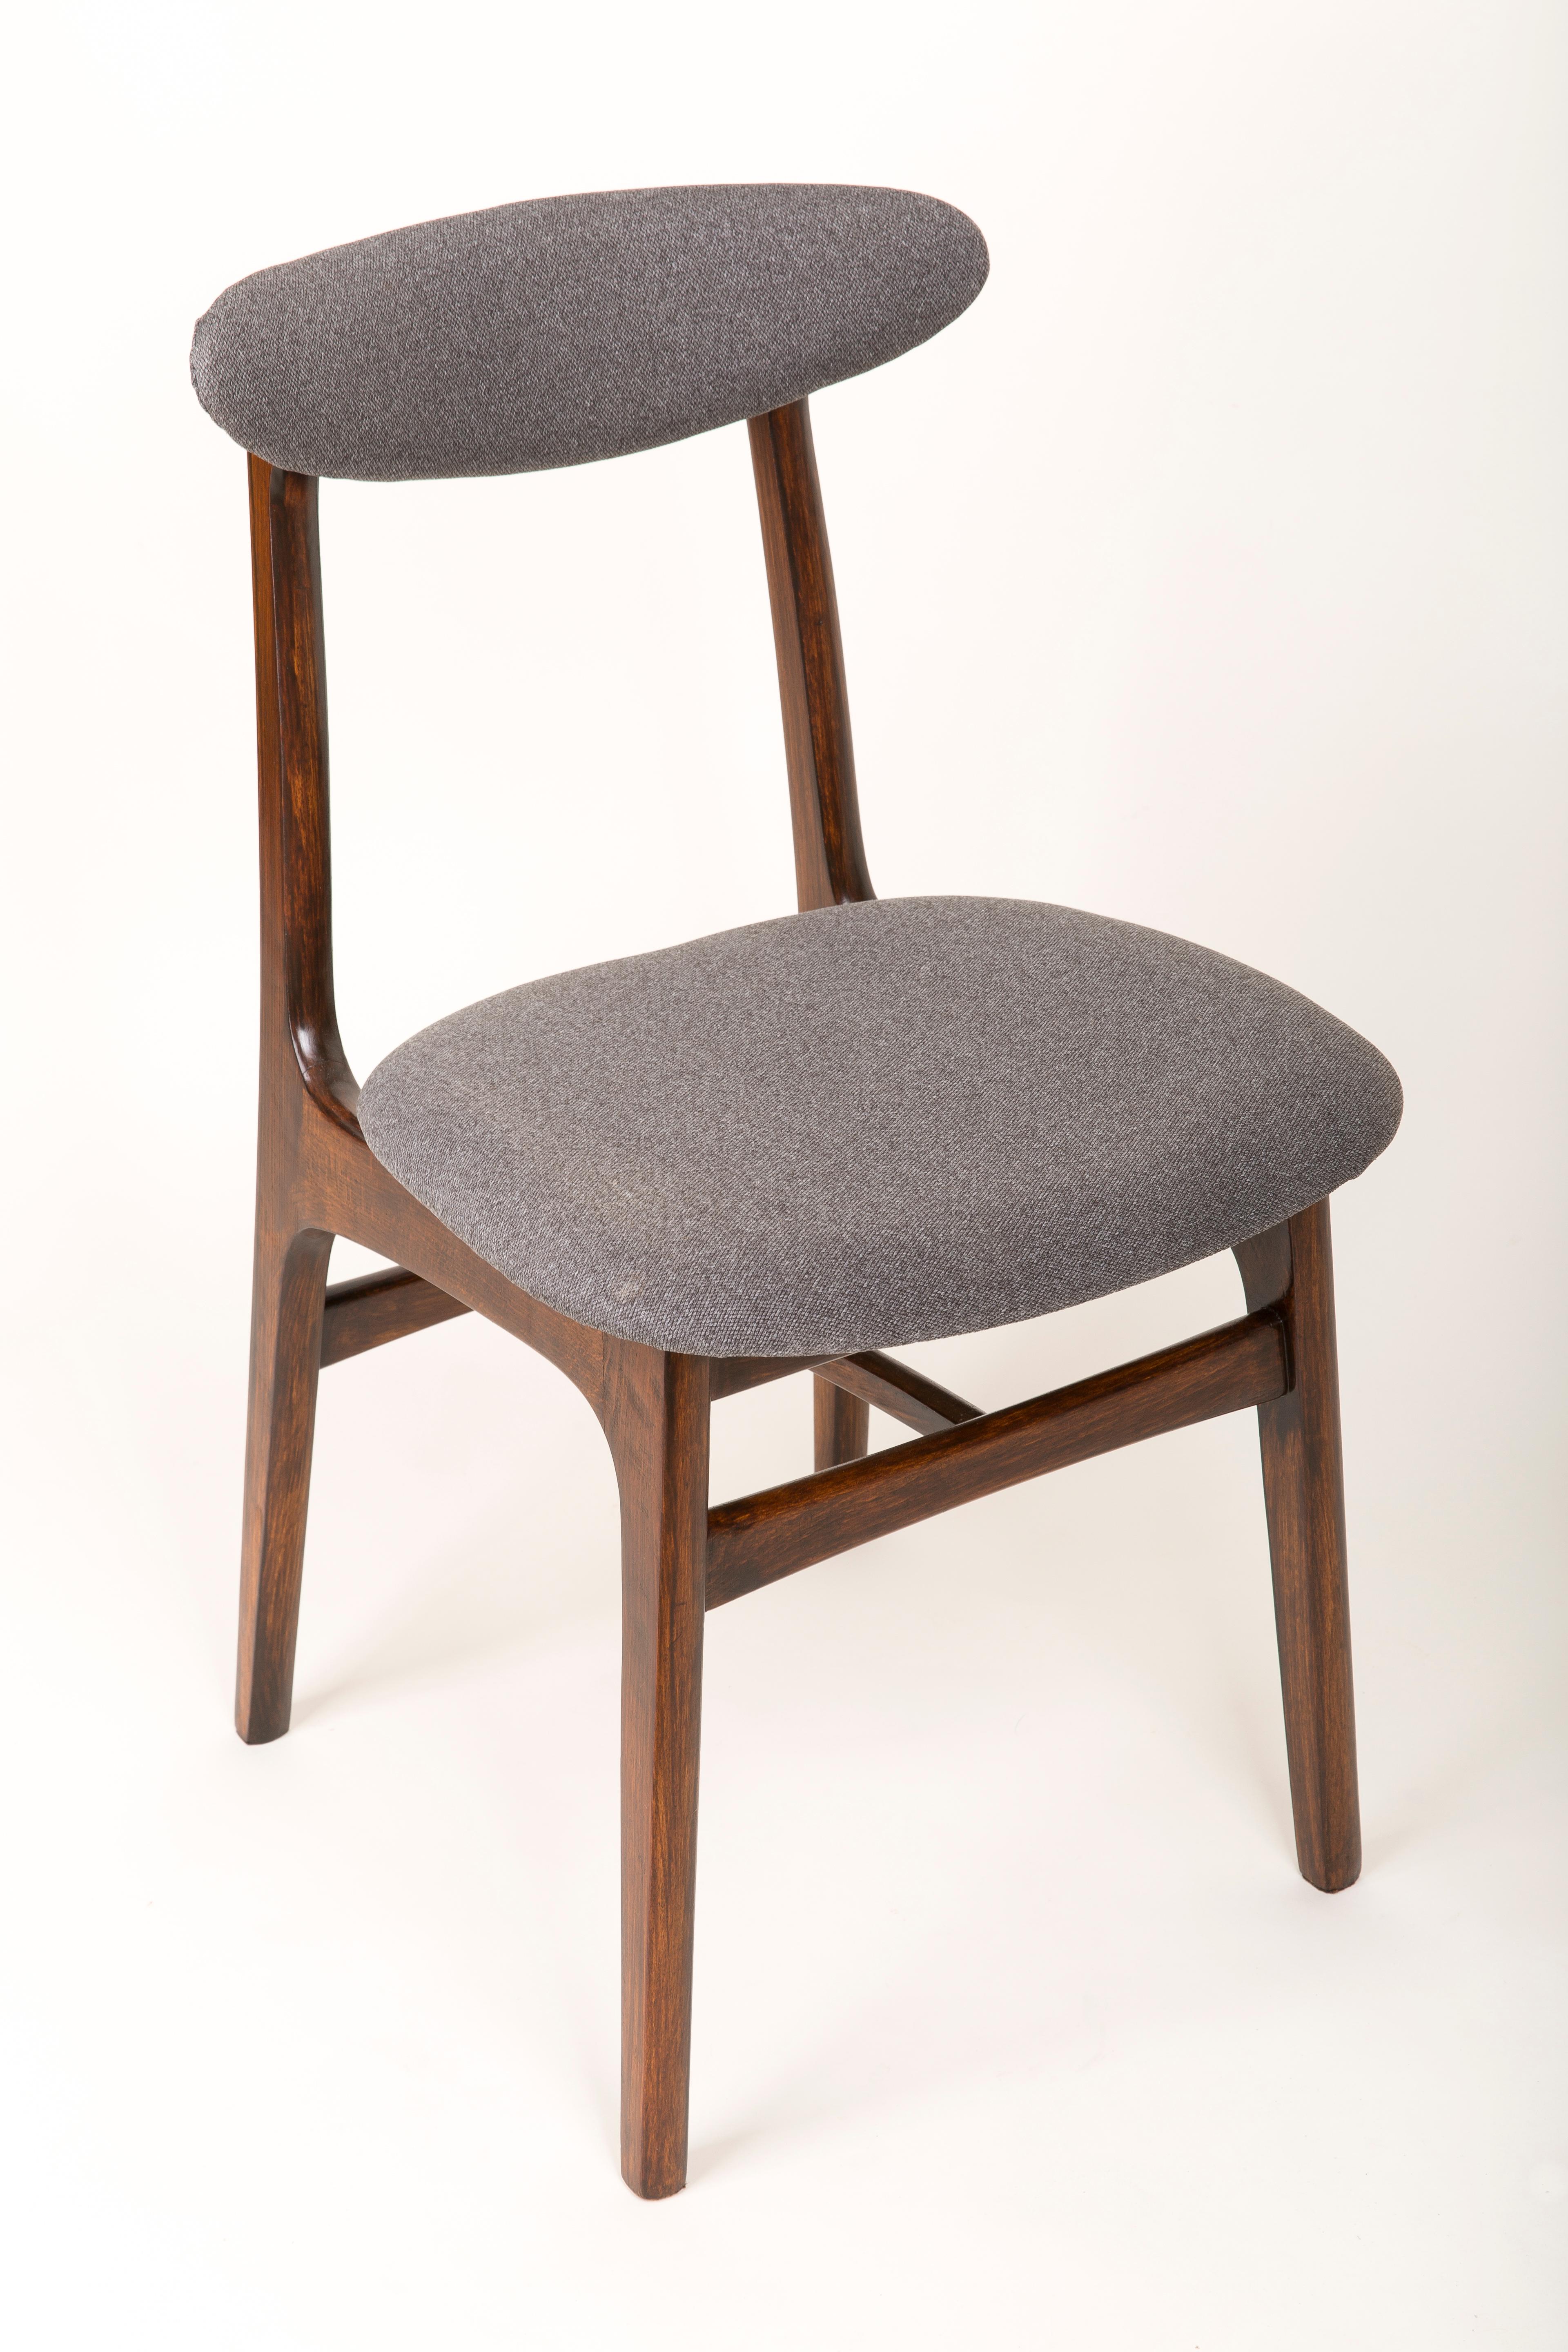 Set of Four 20th Century Gray Chairs by Rajmund Halas, 1960s In Excellent Condition For Sale In 05-080 Hornowek, PL